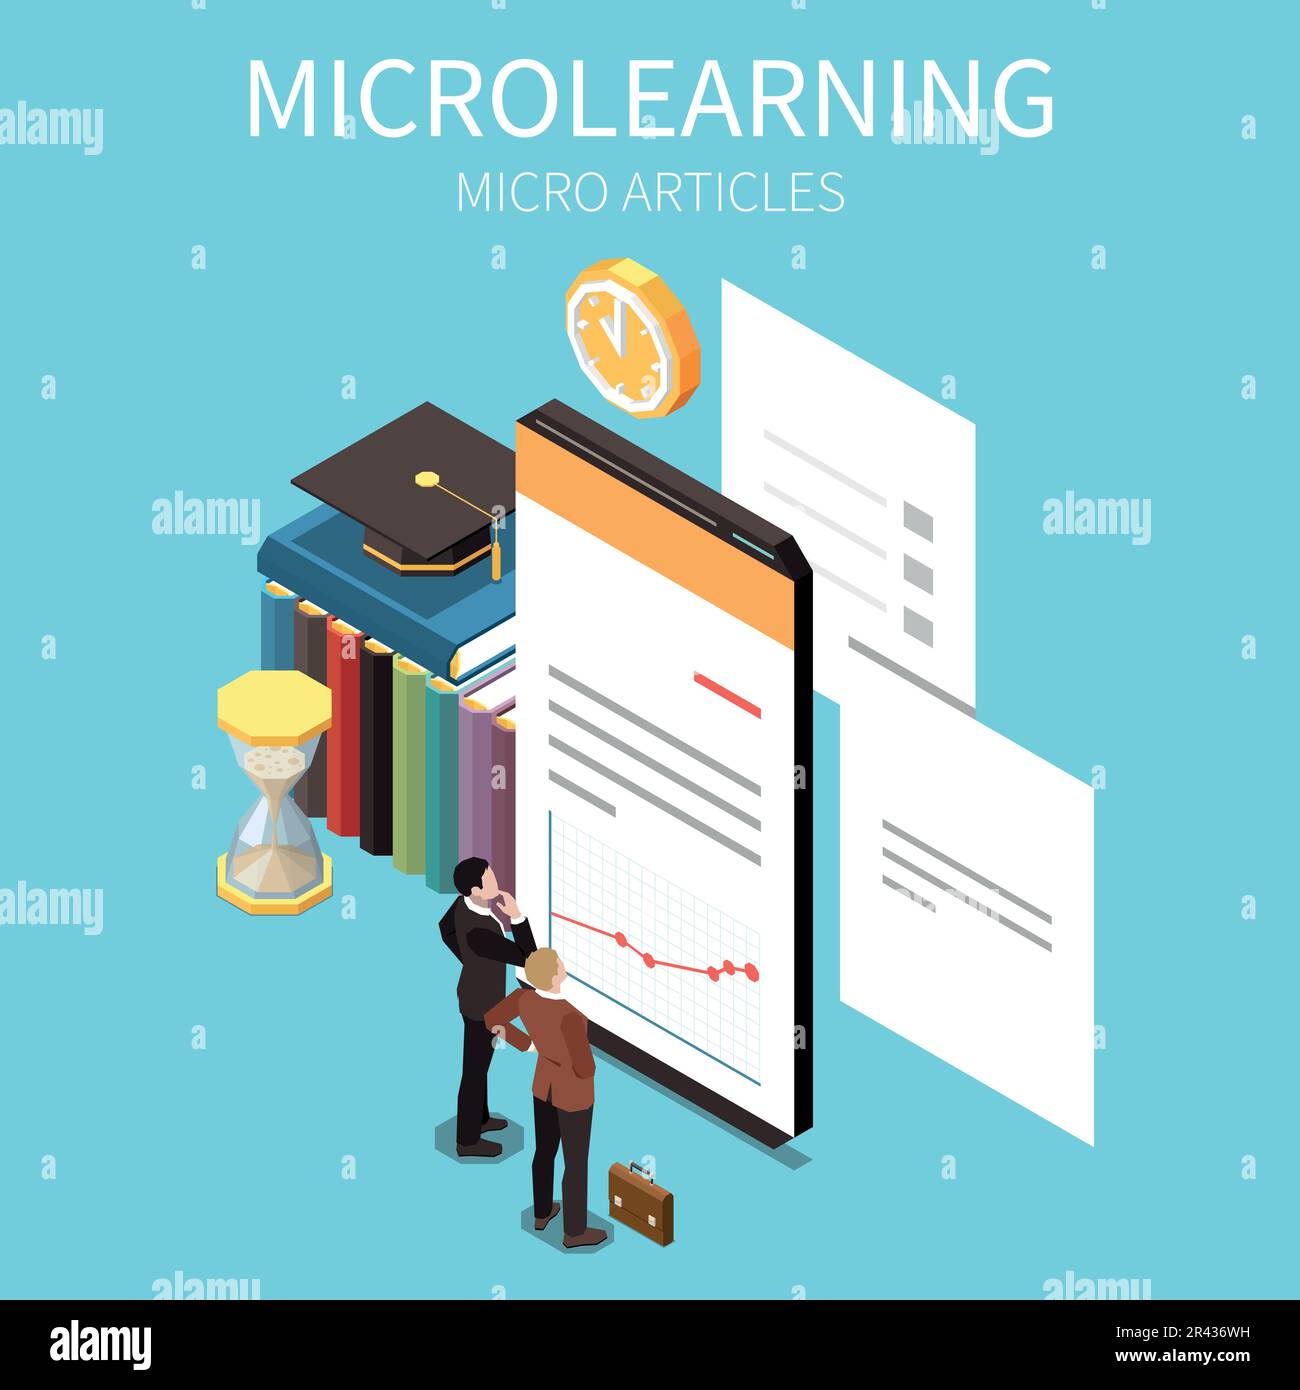 Microlearning isometric concept with micro articles trend vector illustration Stock Vector